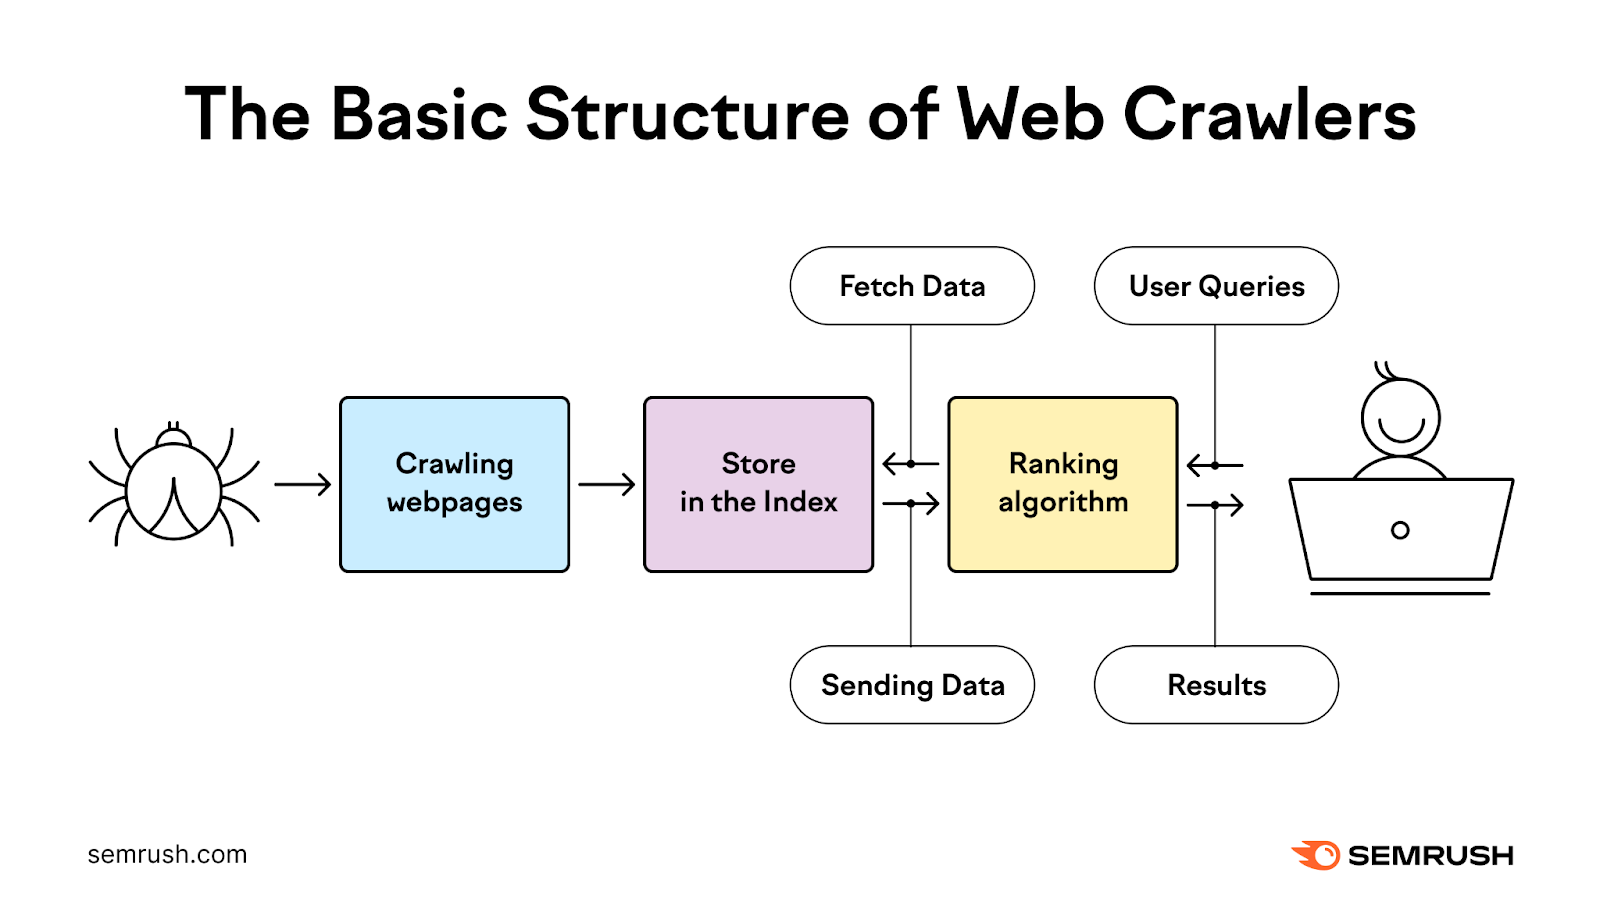 The basic structure of web crawlers includes crawling webpages, index storing, and ranking algorithm, among others.